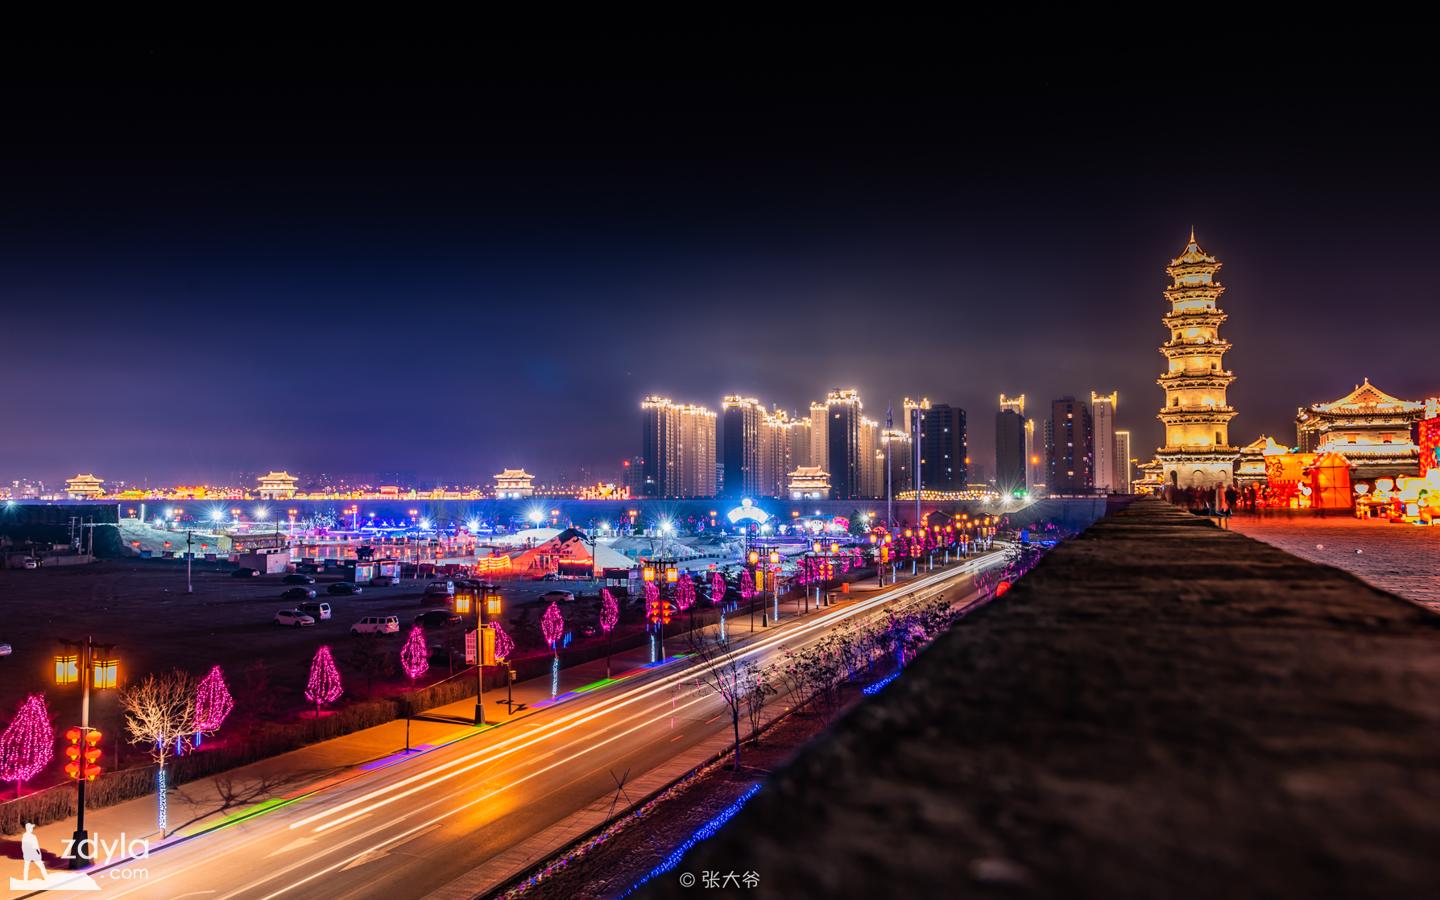 Datong is fading tonight